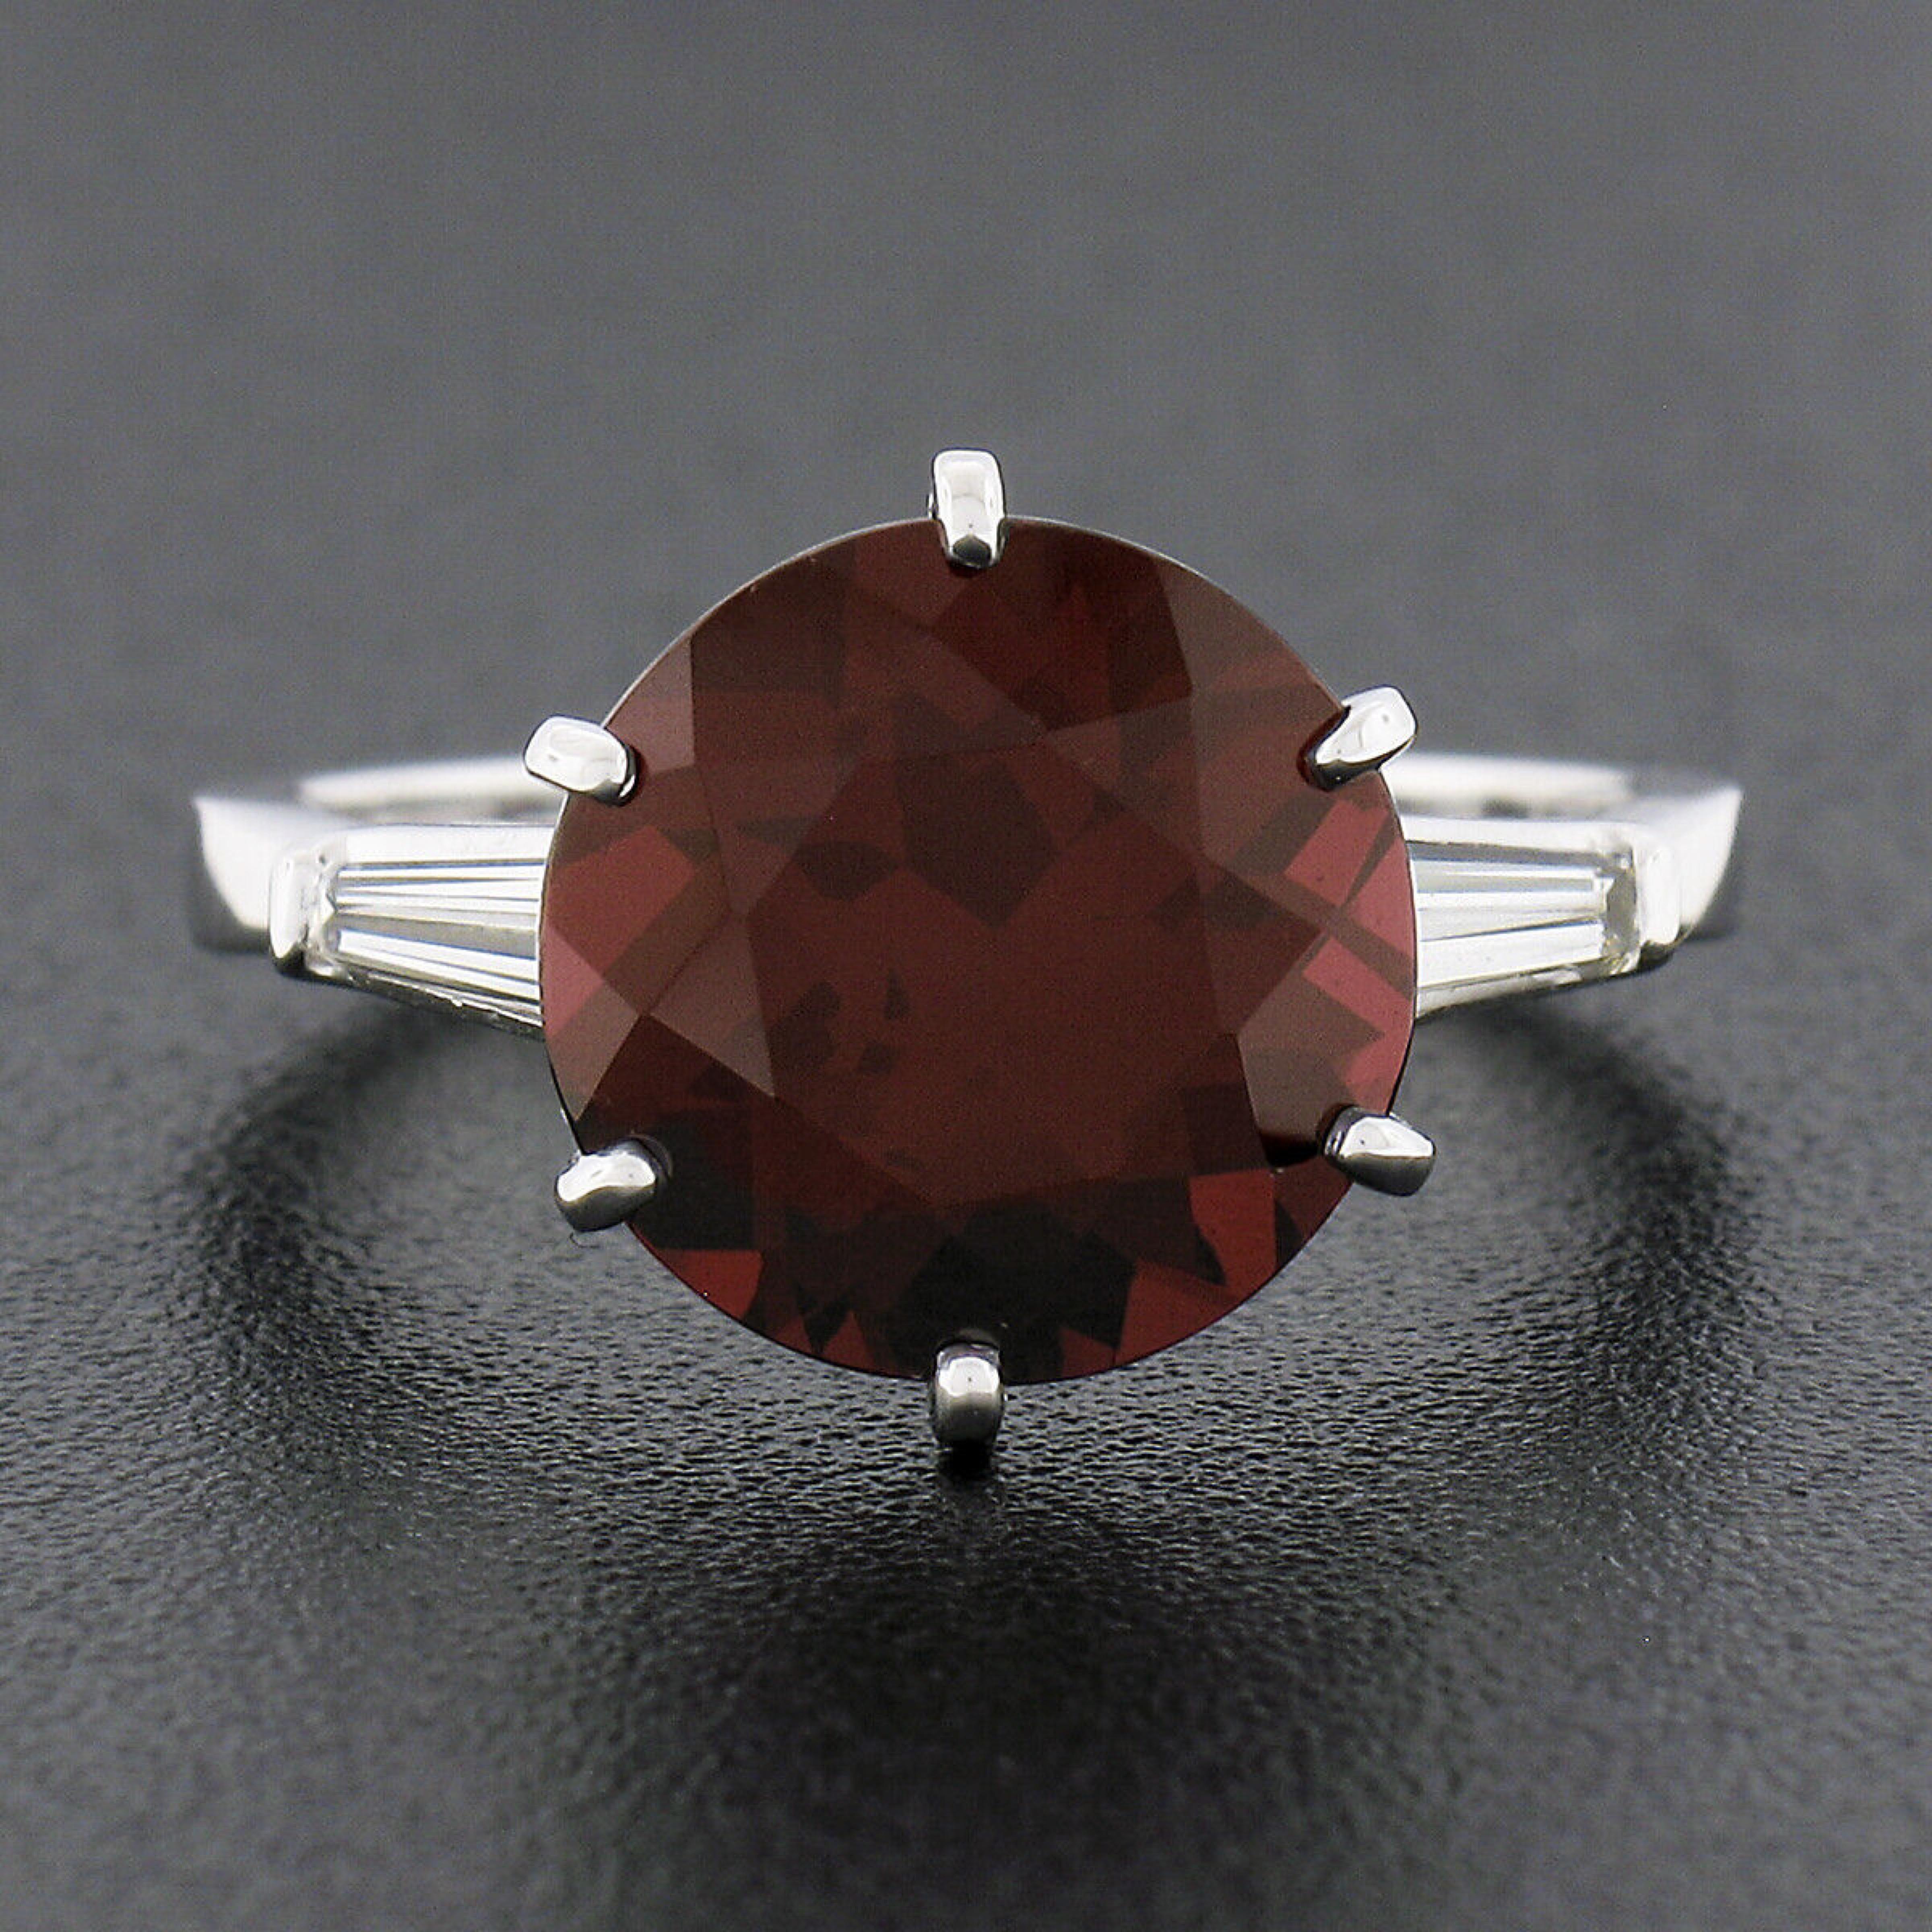 Here we have a truly breathtaking vintage ring crafted from solid platinum featuring an elegant 3-stone style that carries an absolutely incredible round brilliant cut garnet 6-prong set at the center with tapered baguette diamonds neatly channel